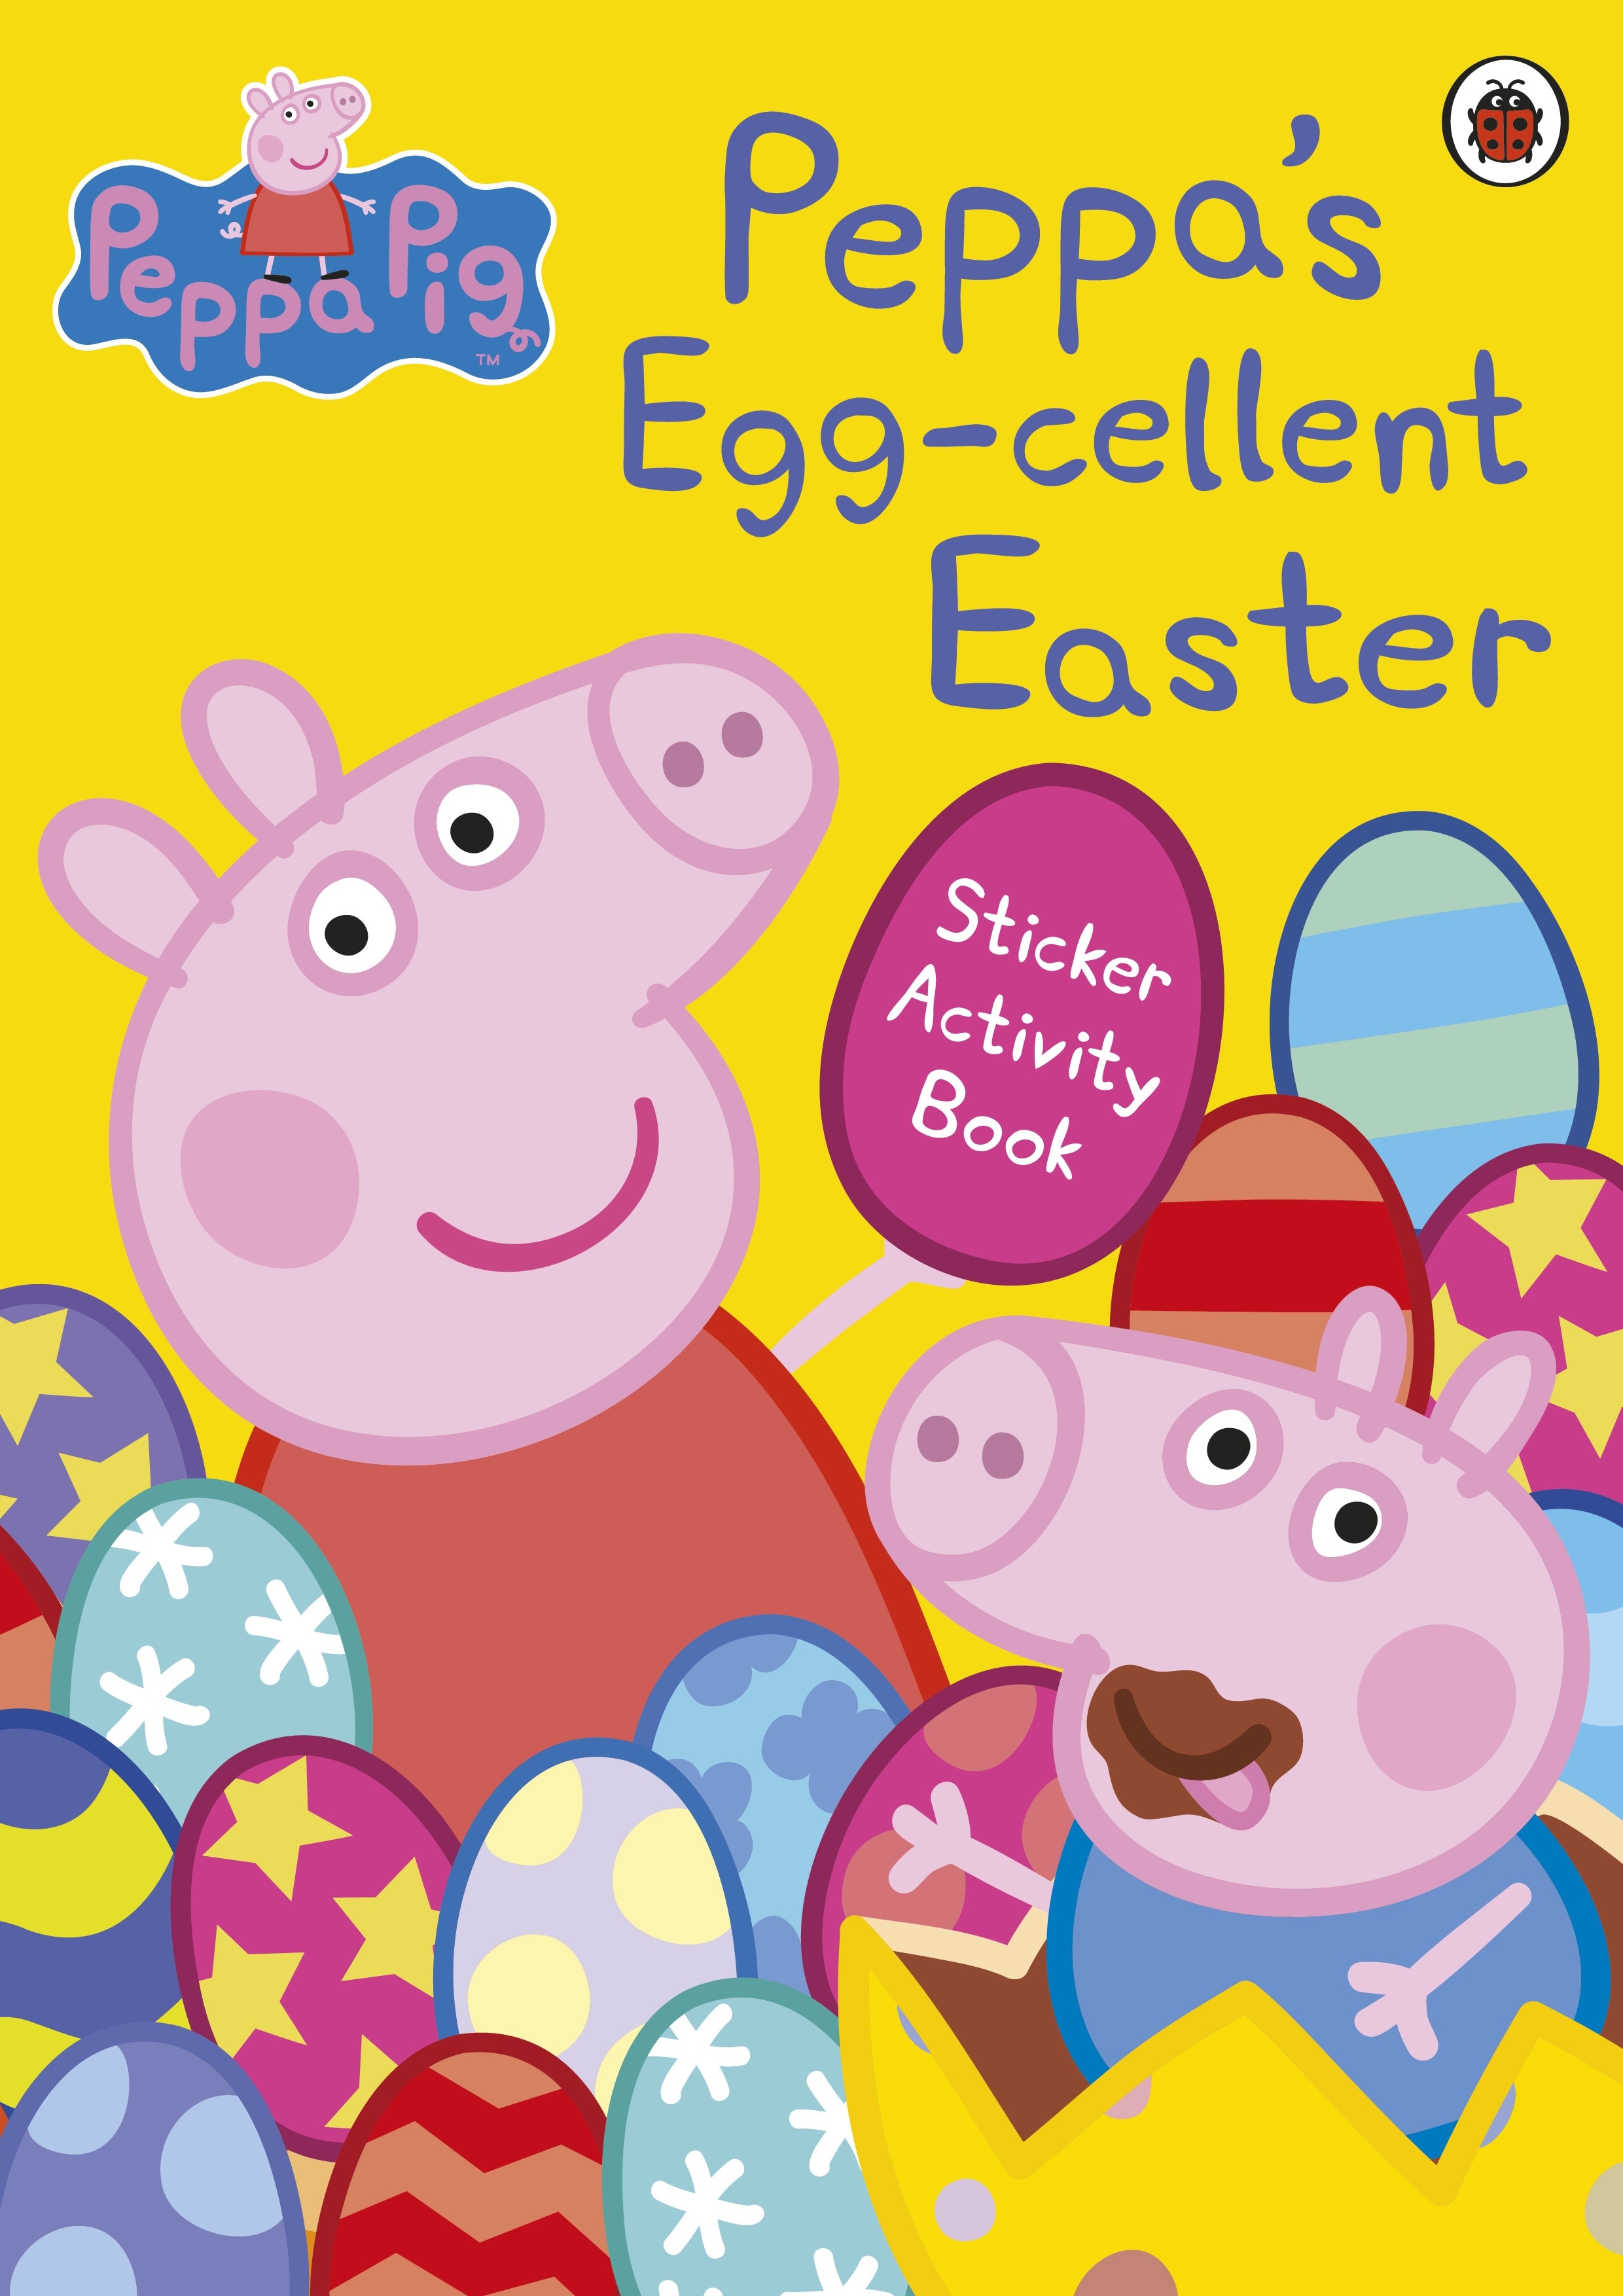 Book “Peppa Pig: Peppa’s Egg-cellent Easter Sticker Activity Book” by Peppa Pig — March 7, 2019